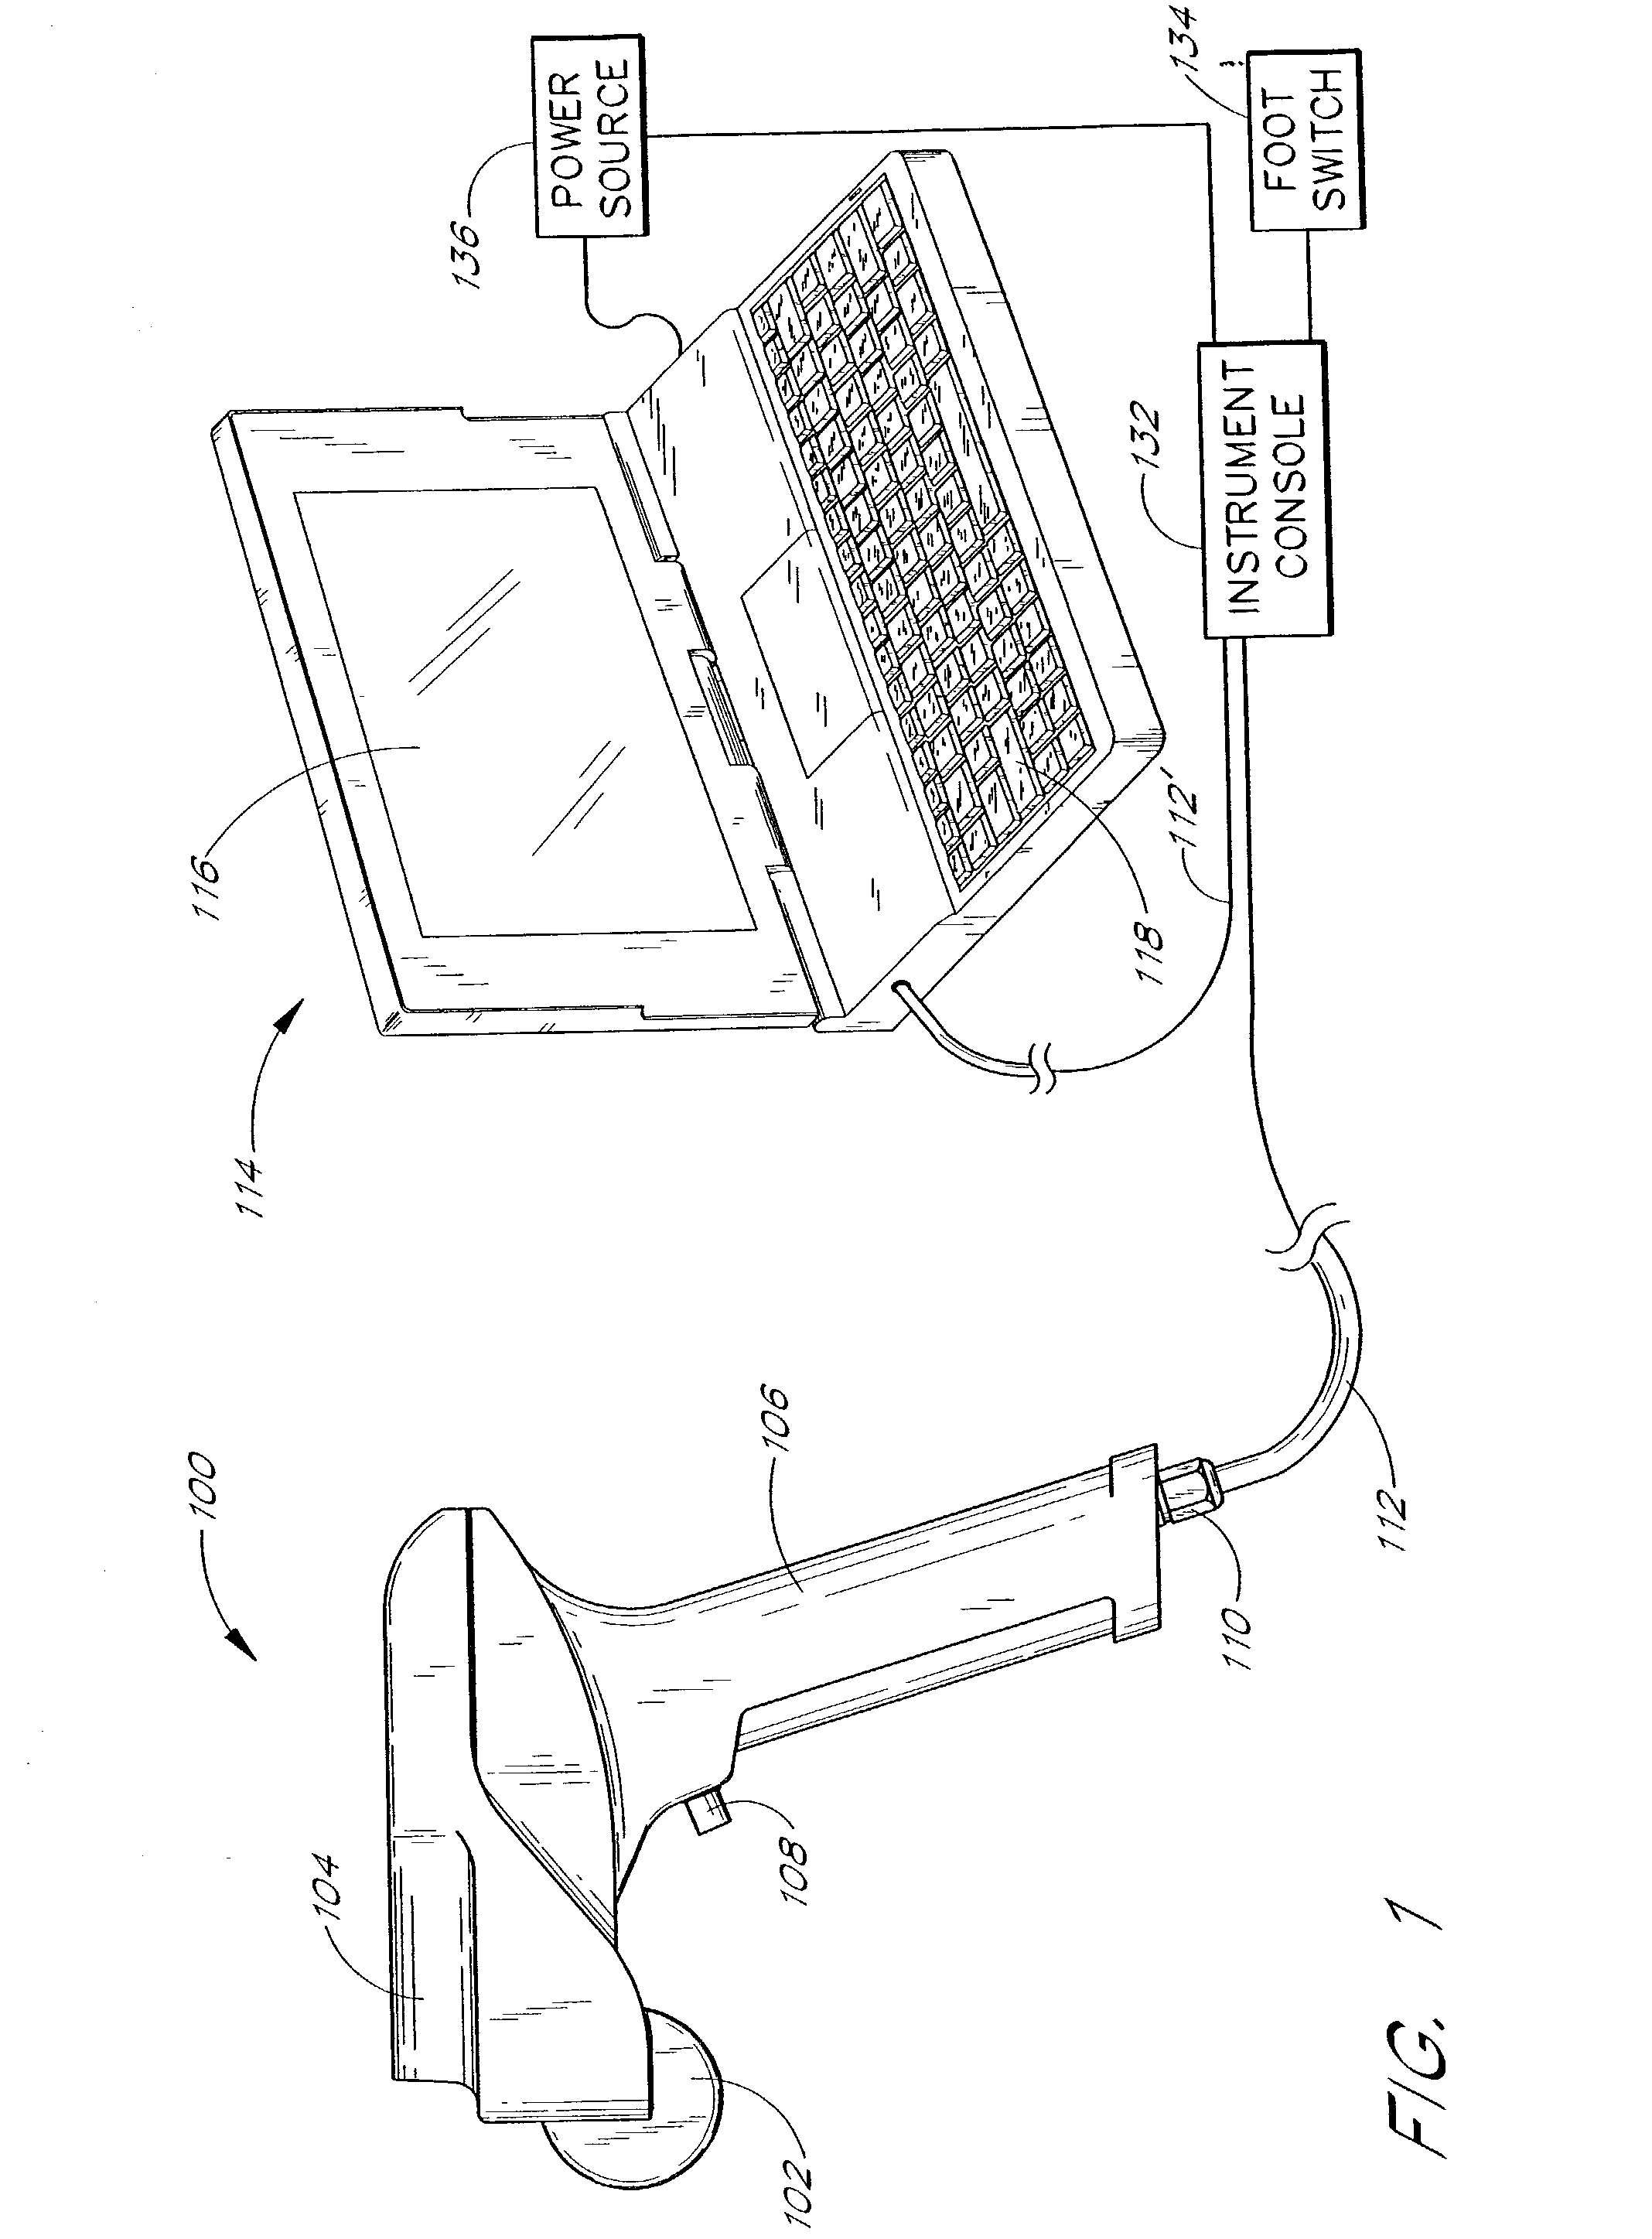 Adjustable thermal scanning system and method